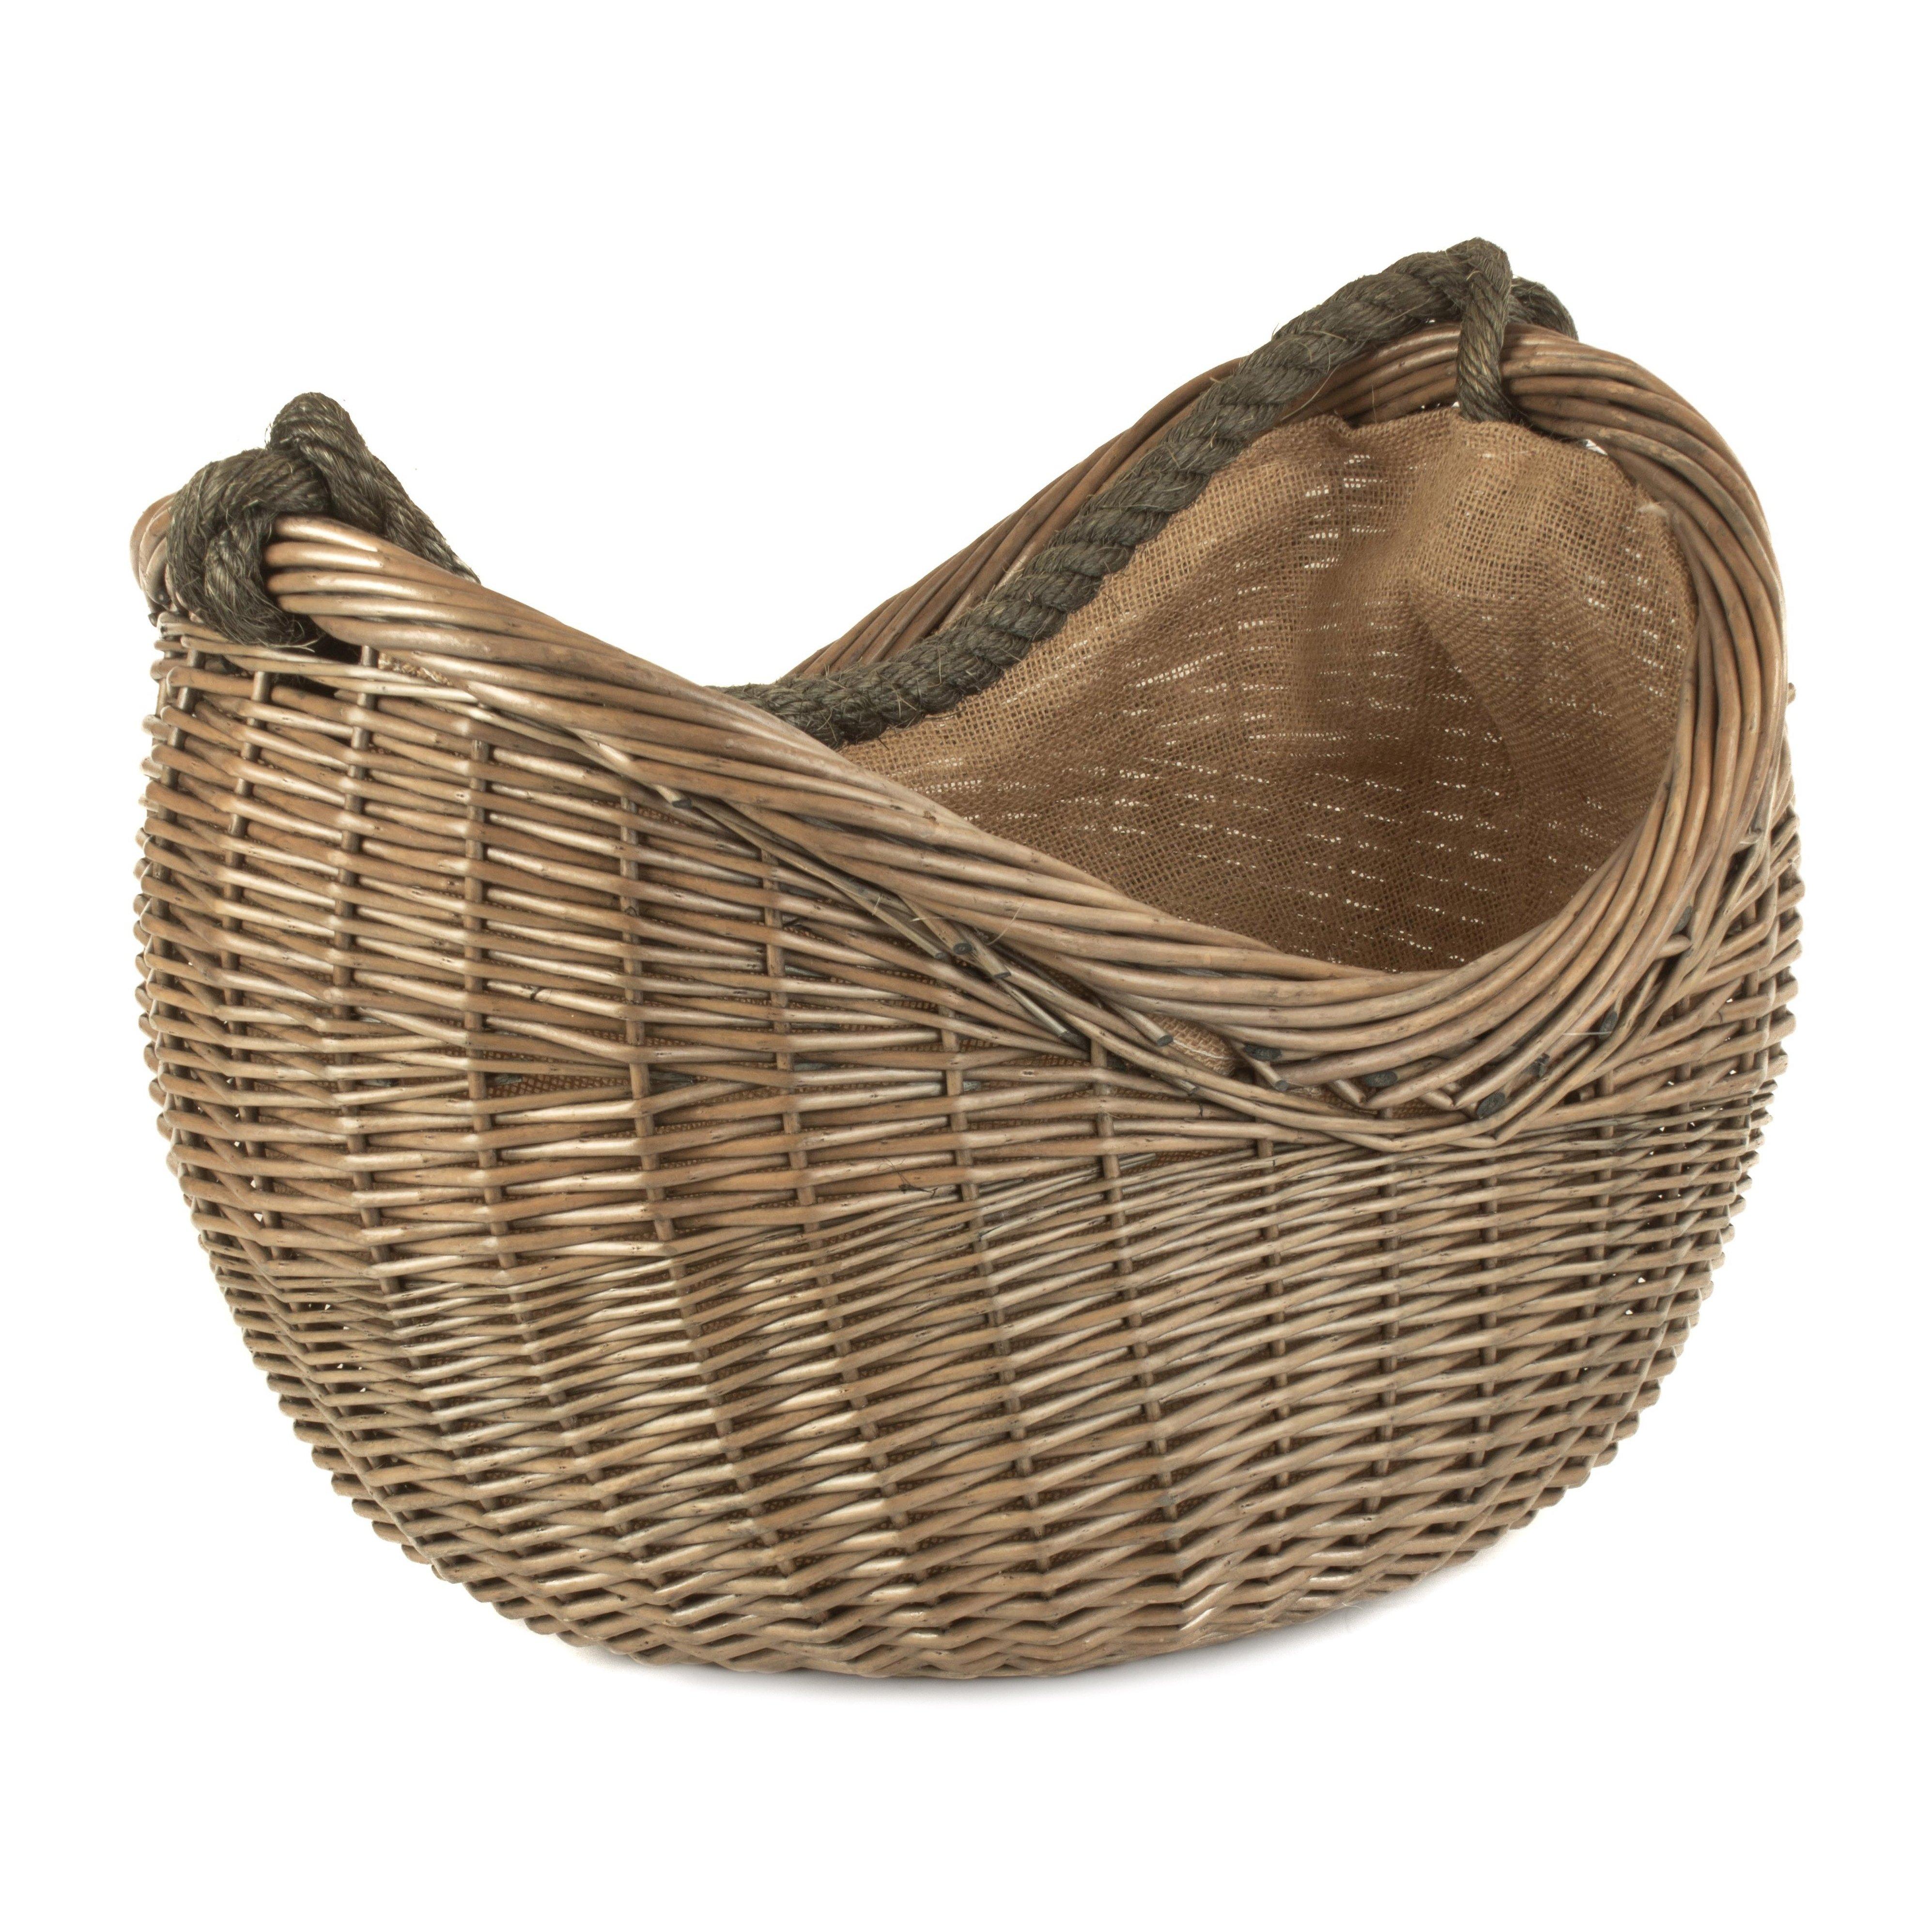 Wicker Antique Wash Rope Handled Carrying Basket